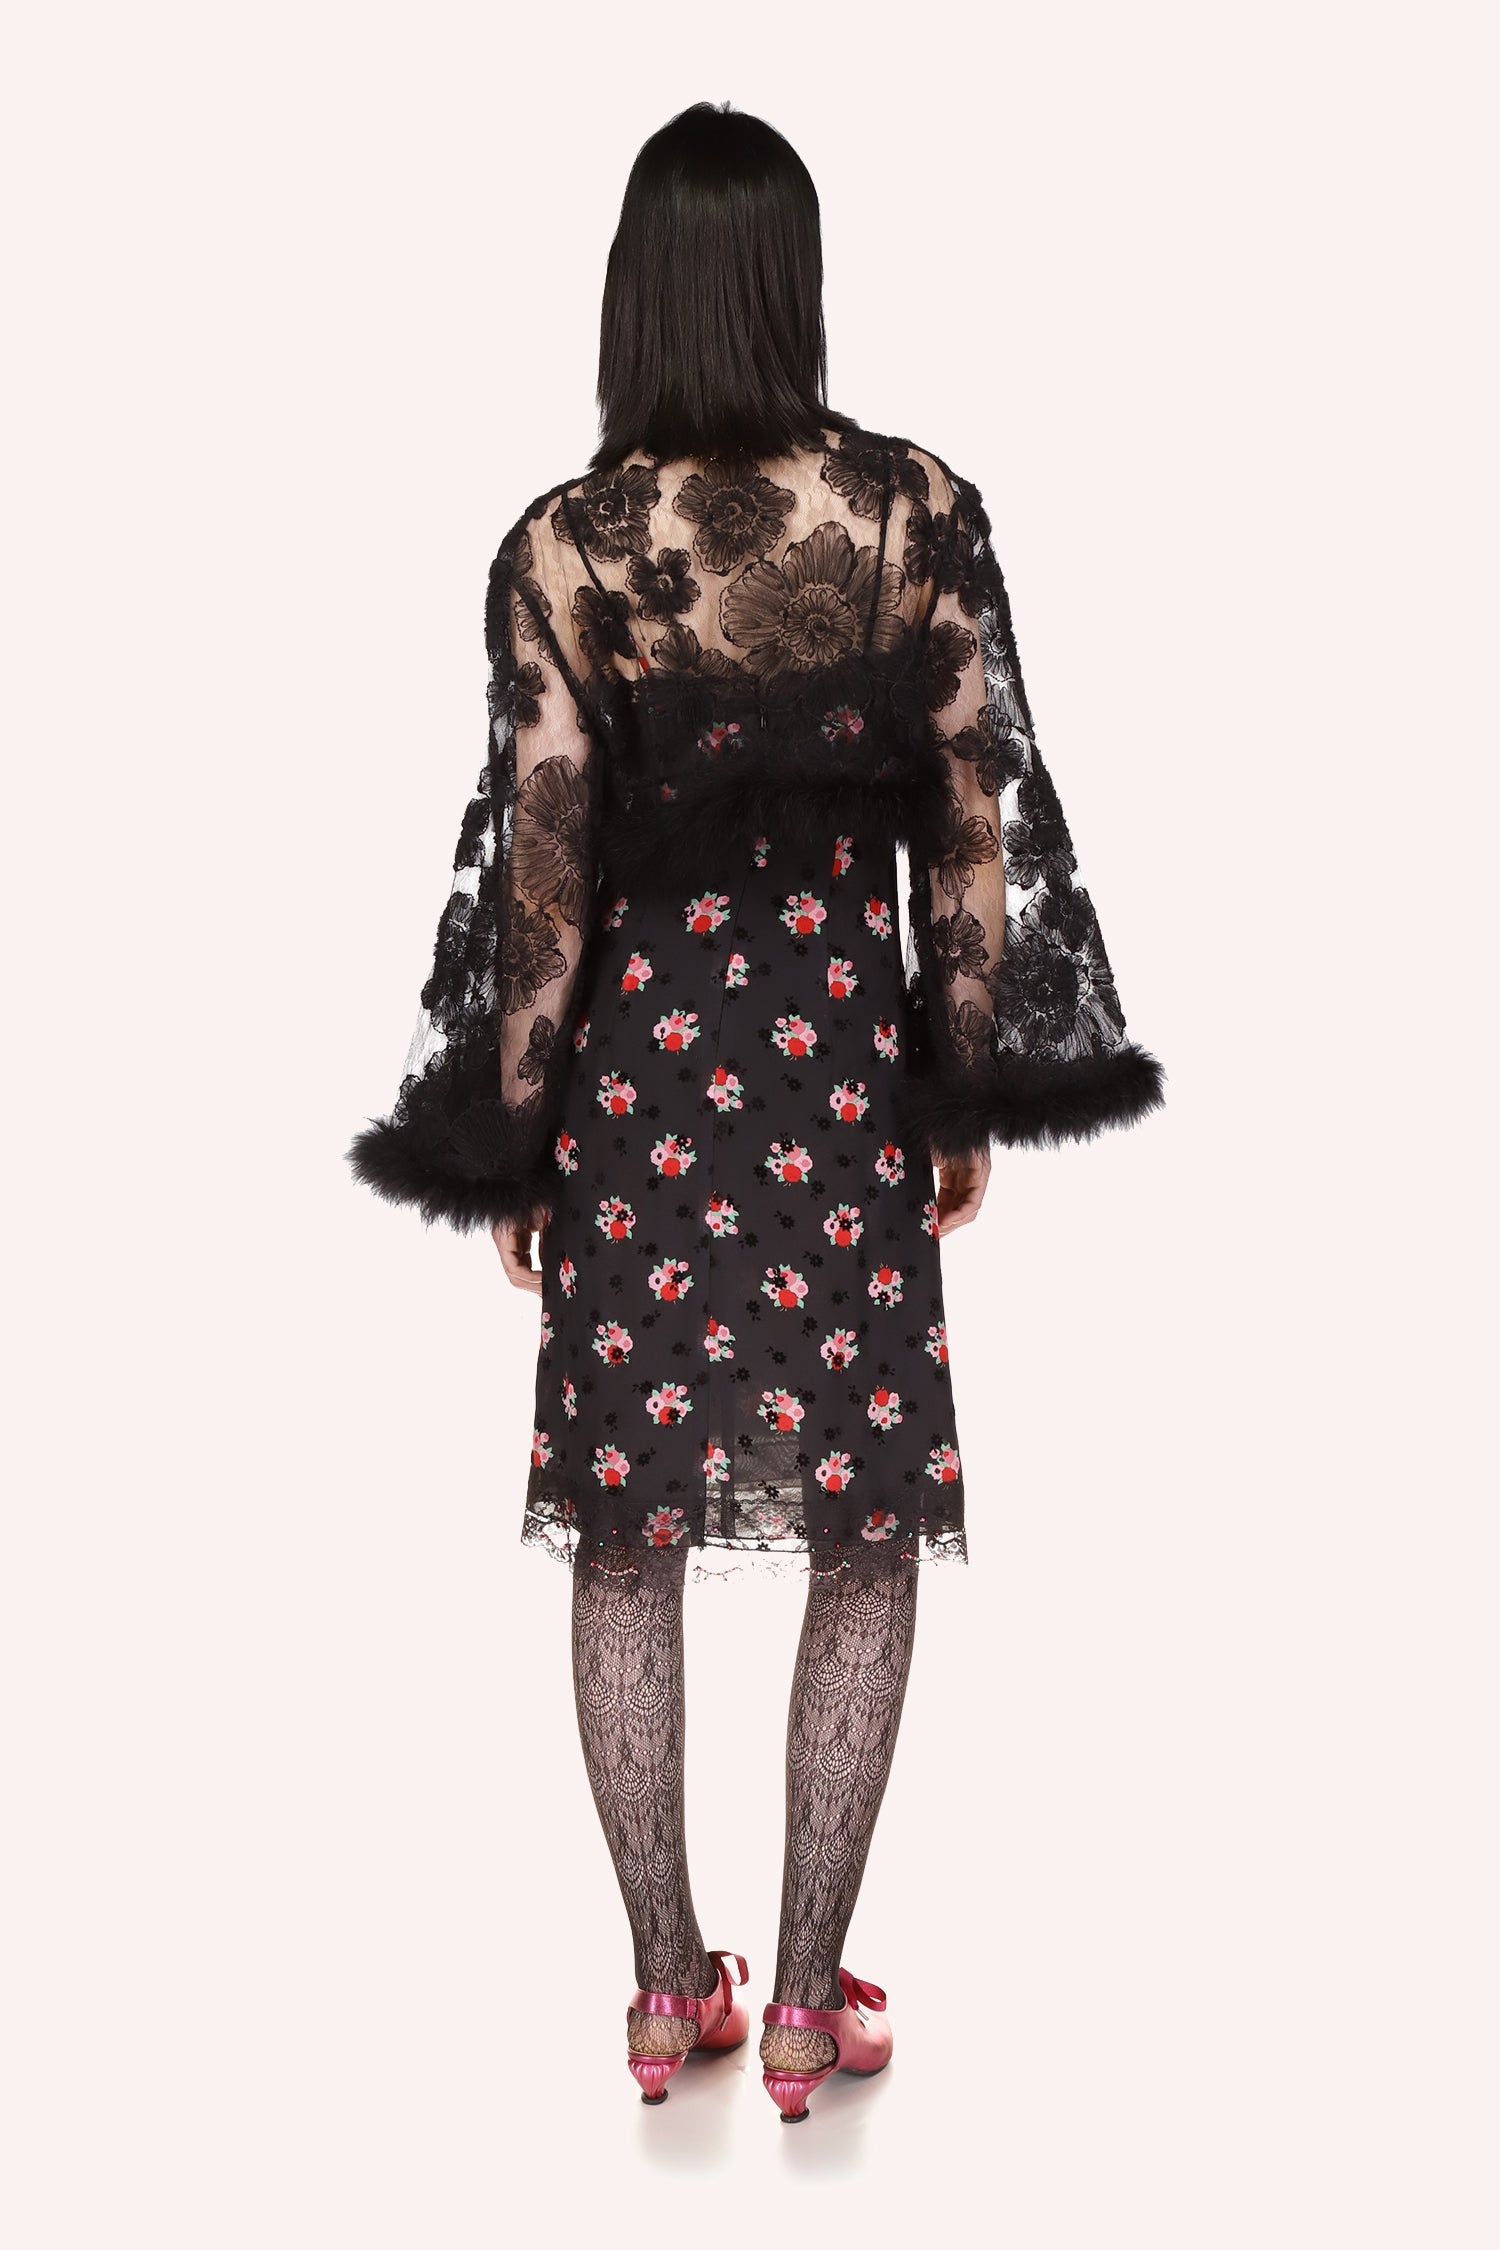 Anna Sui's stunning 3D Floral Tulle Bed Jacket in black, featuring large black flowers, sheer fabric